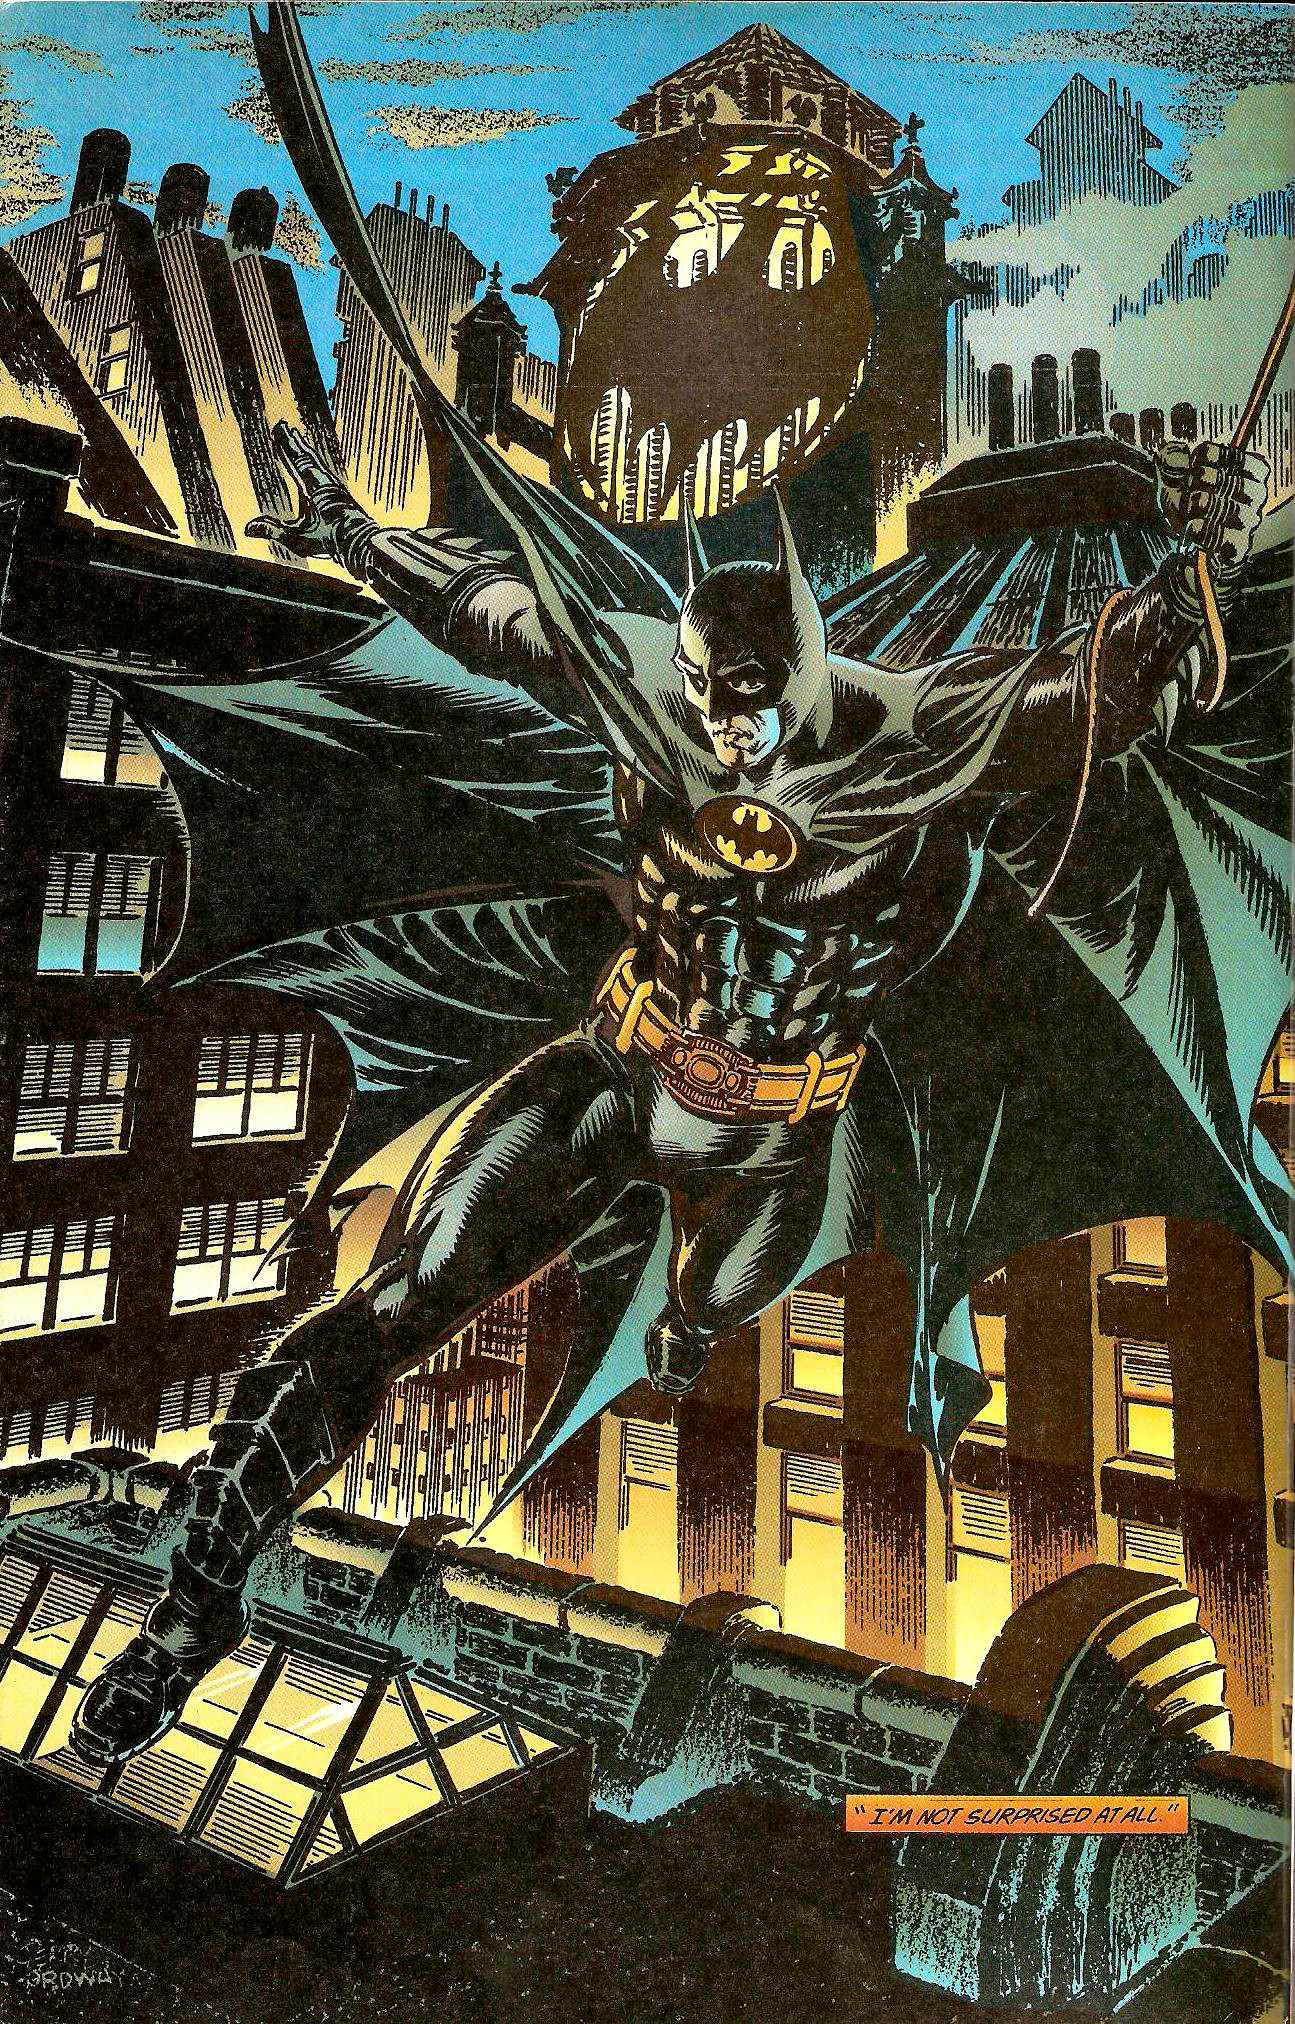 From Batman: The Official Comic Book Adaptation of the Warner Bros Motion Picture (1989)